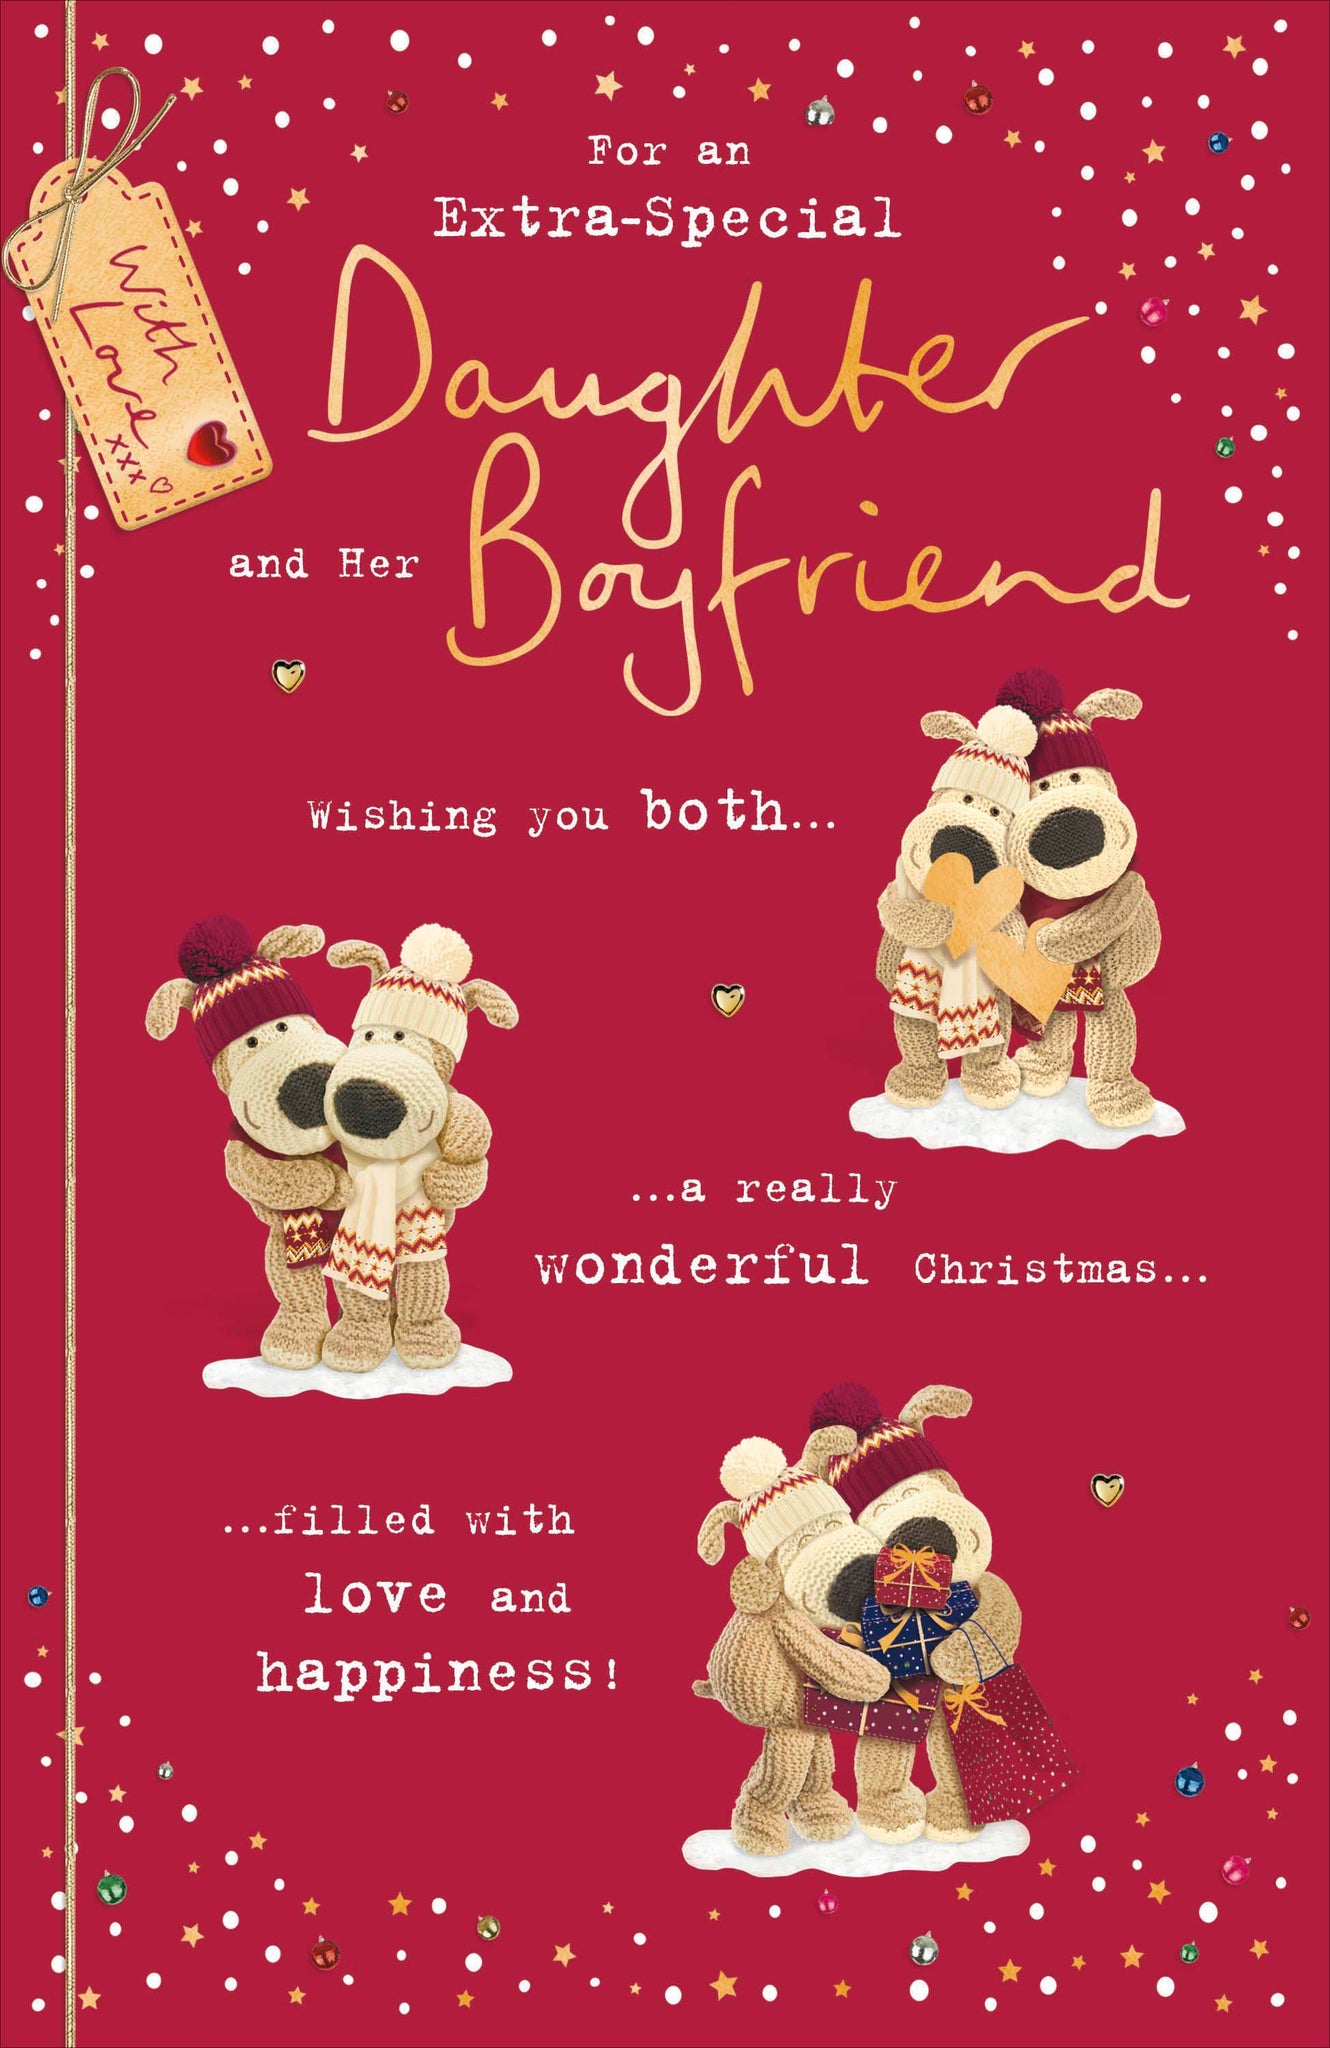 Daughter and Boyfriend Christmas card - Boofle